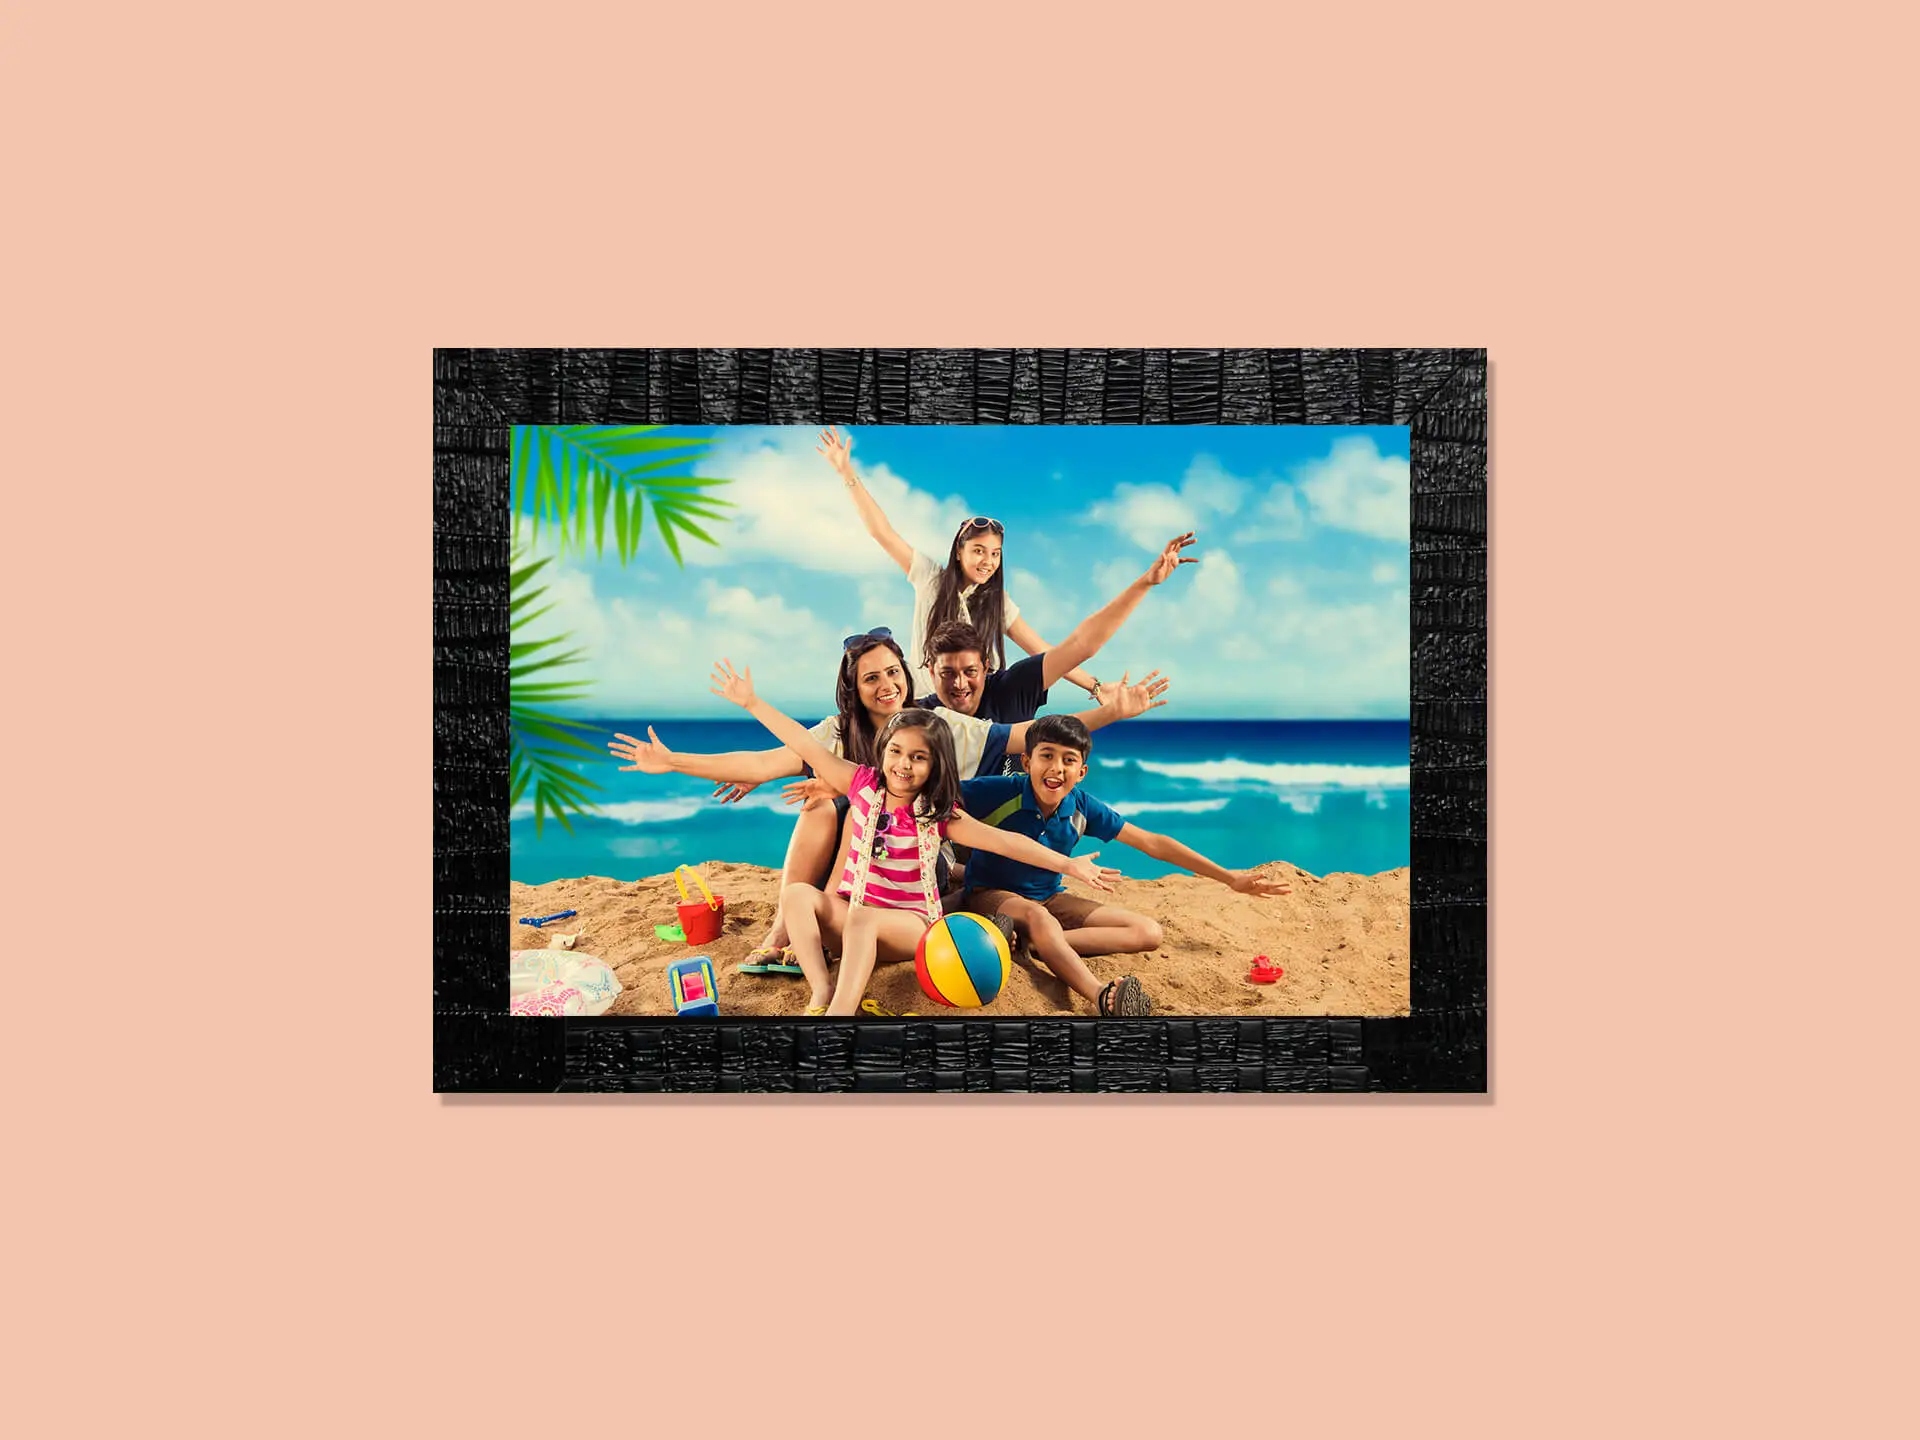 Photo Frames 12 x 18 in (A3) 